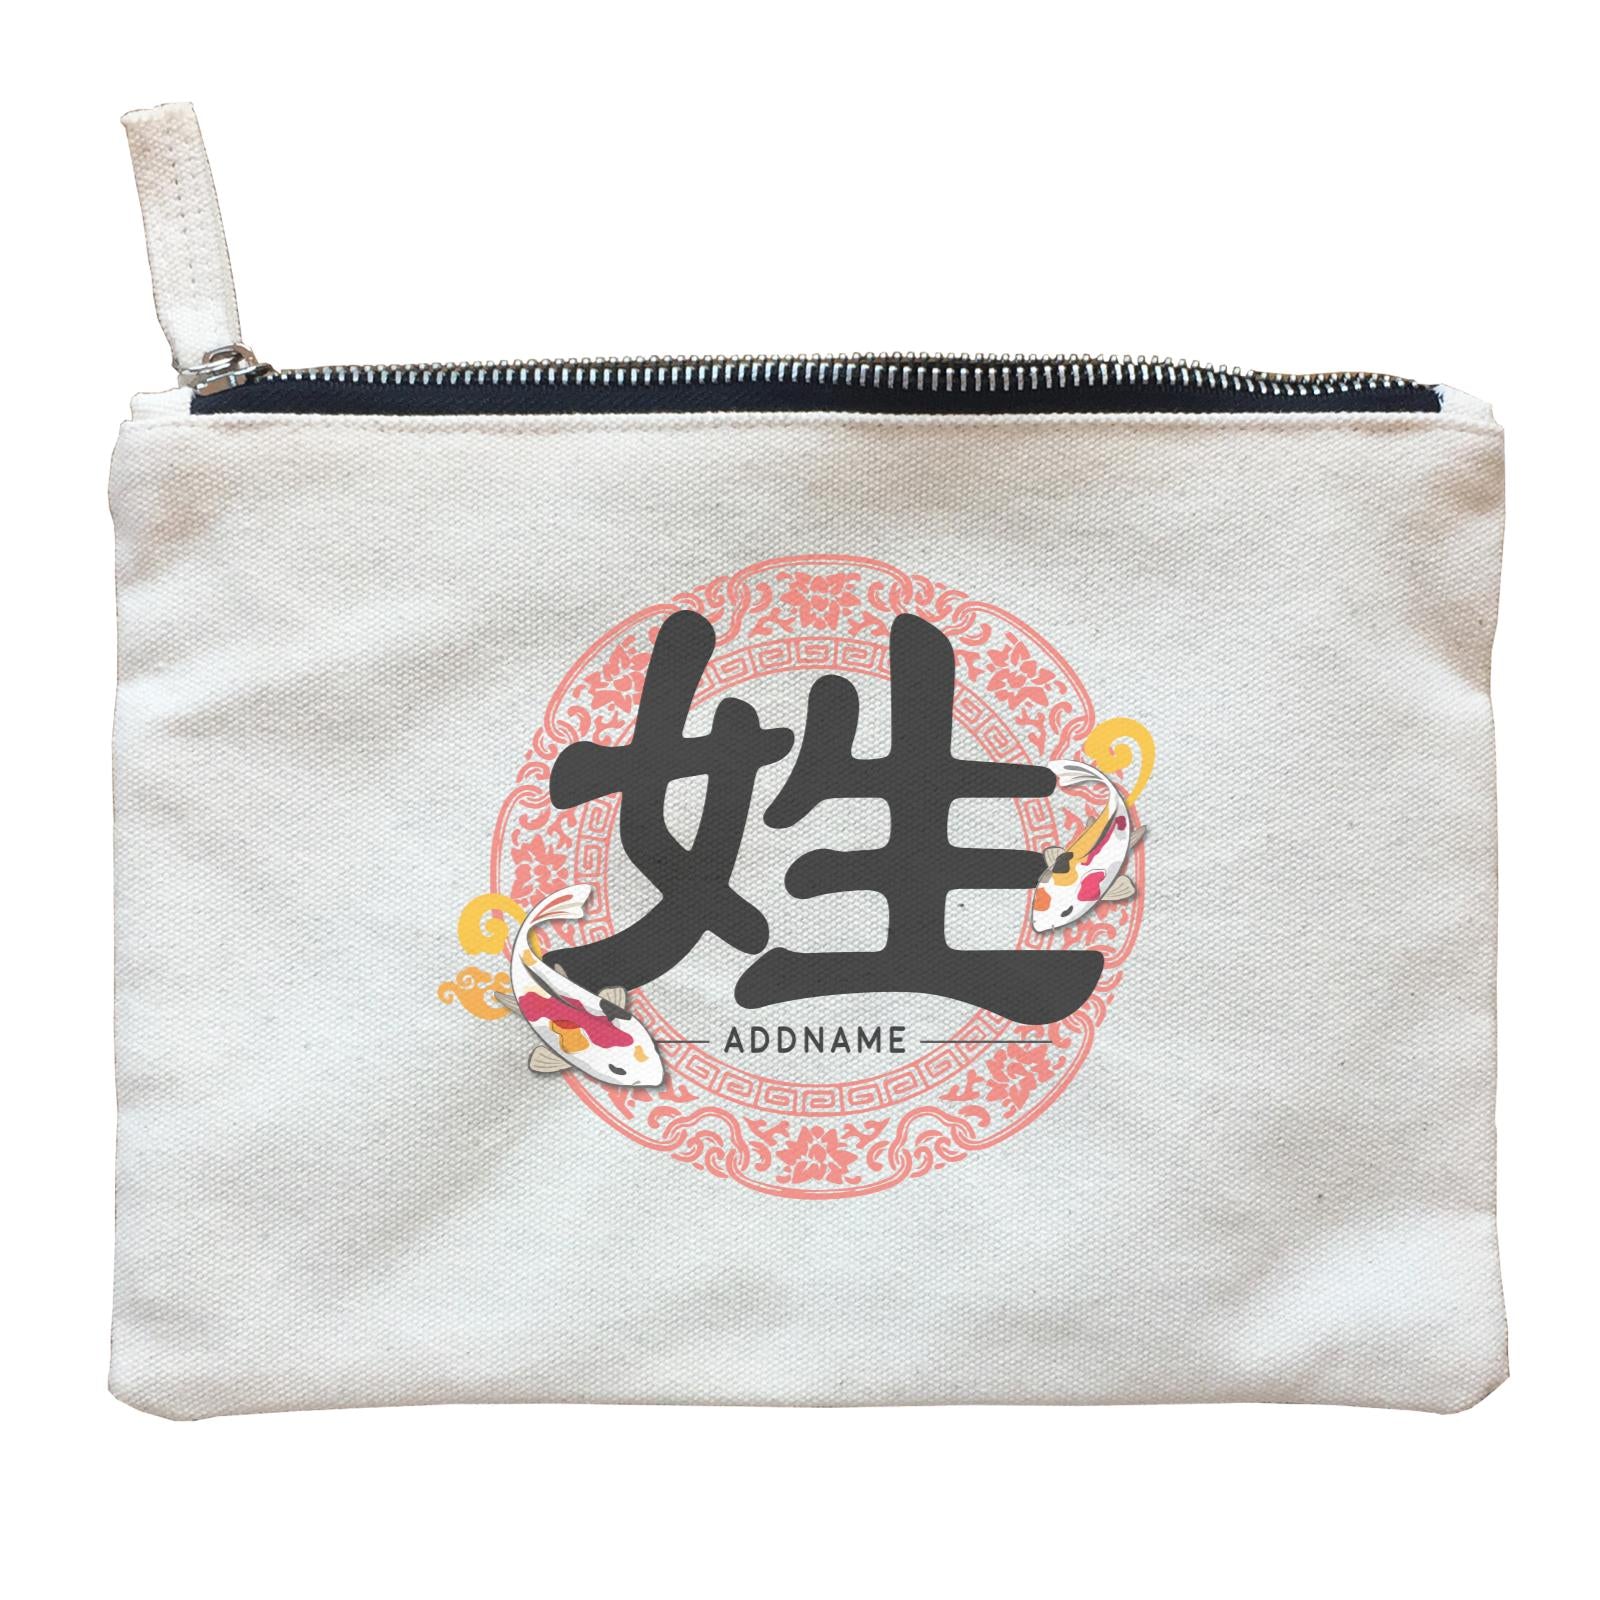 Chinese New Year Patterned Fish Surname with Floral Emblem Zipper Pouch